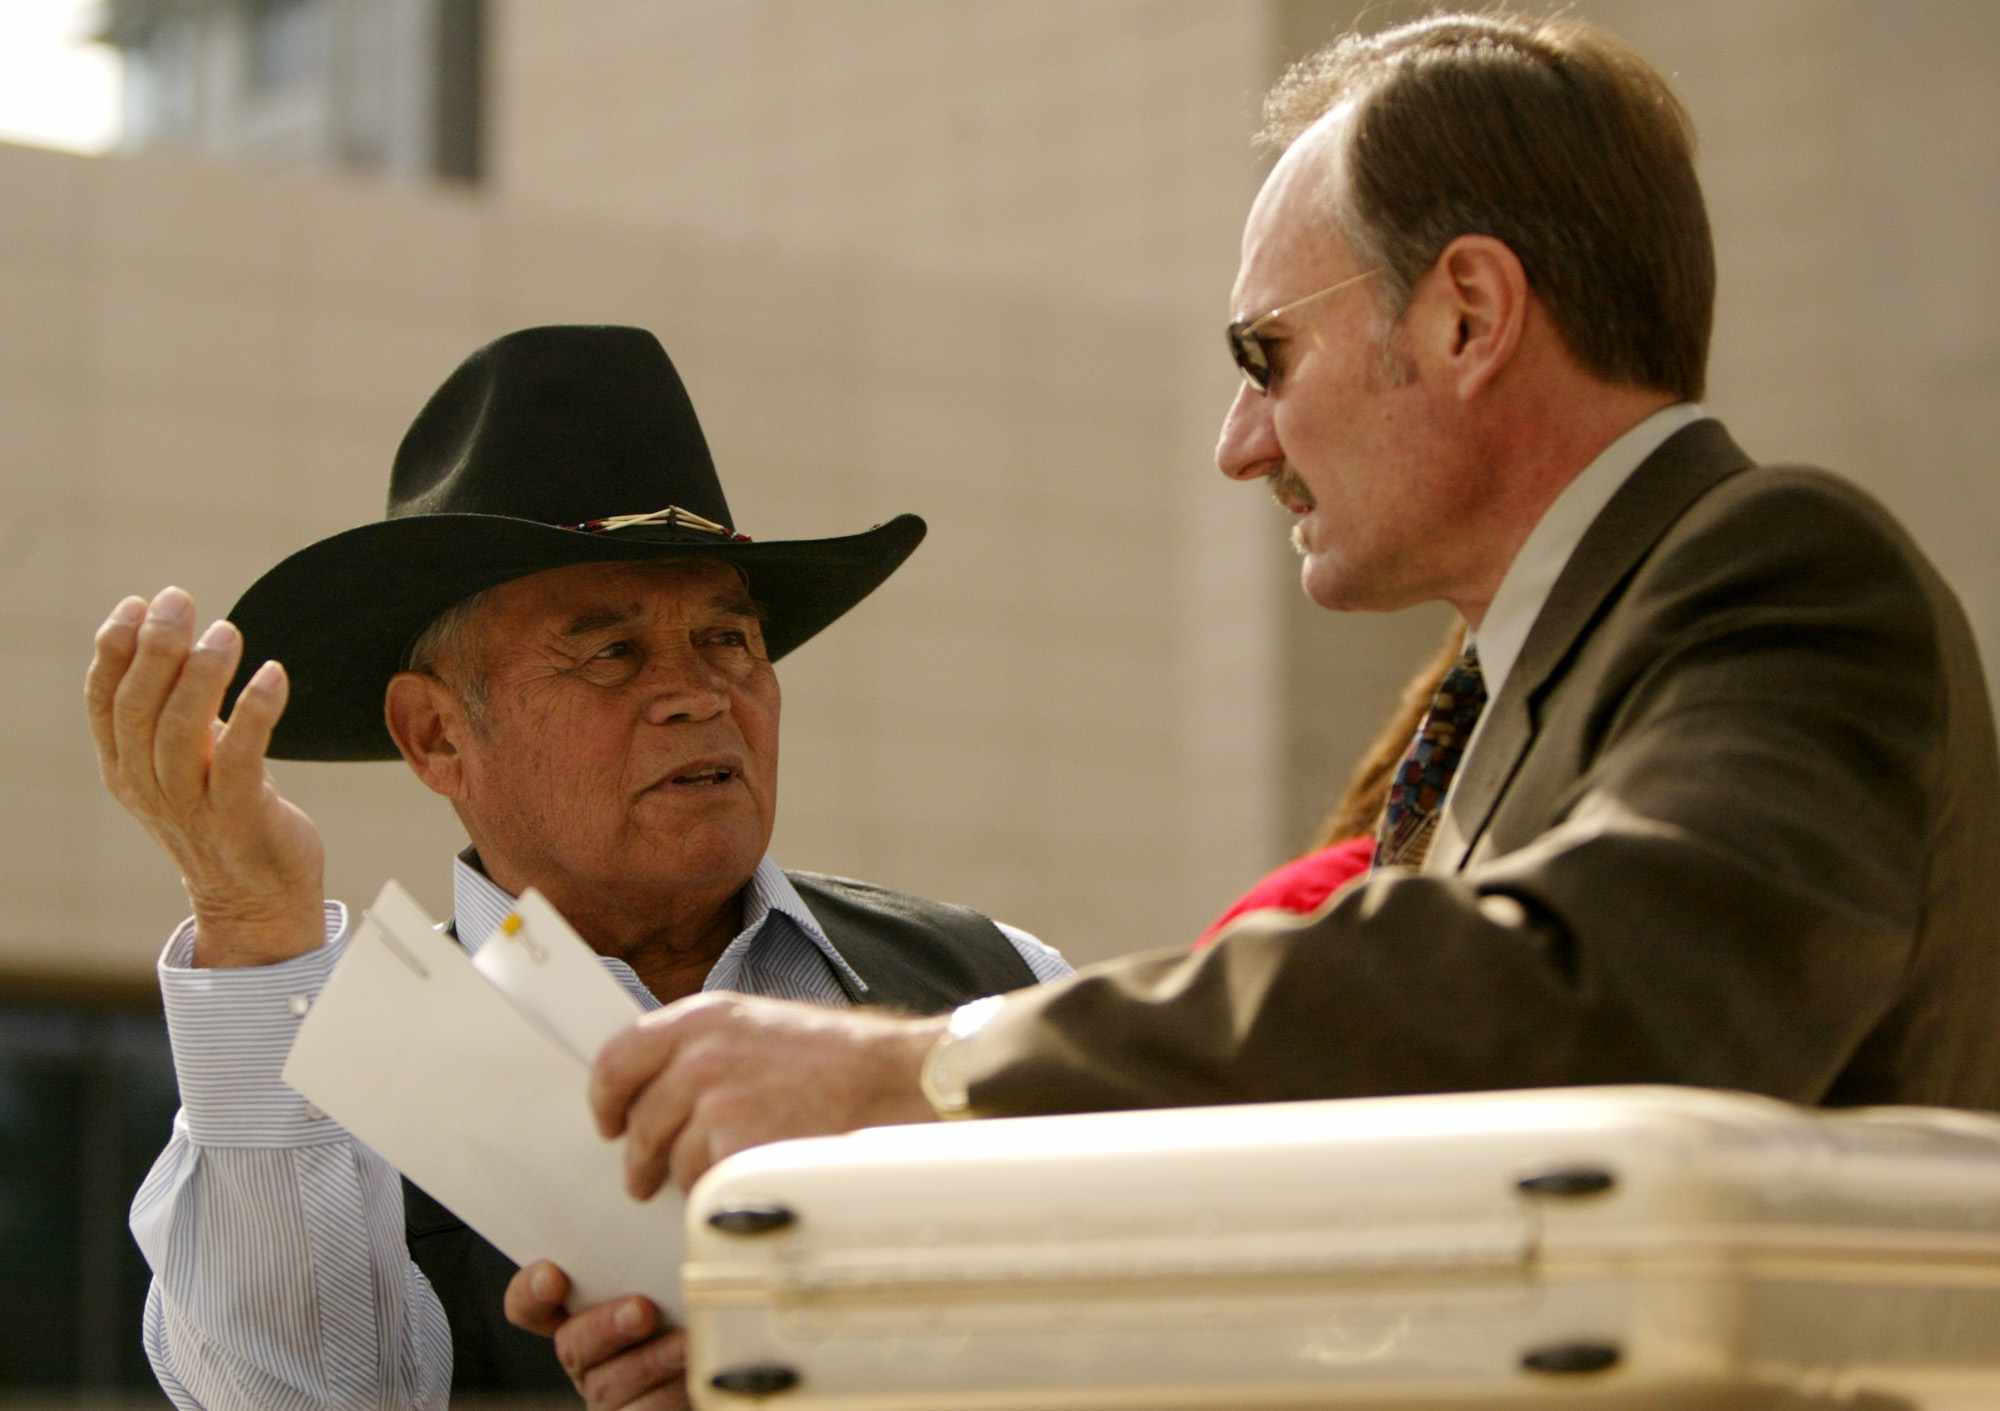 Chief Raymond Yowell of the Western Shoshone Nation, left, confers with tribal attorney Robert Hager, at the U.S. Federal Courhouse in Las Vegas, Friday, March 4, 2005. The tribe filed a lawsuit against the federal government saying a 19th century treaty with the federal government prohibits building a nuclear dump on the Yucca Mountain site that Congress and the Bush administration picked for the repository. (AP Photo/Joe Cavaretta)